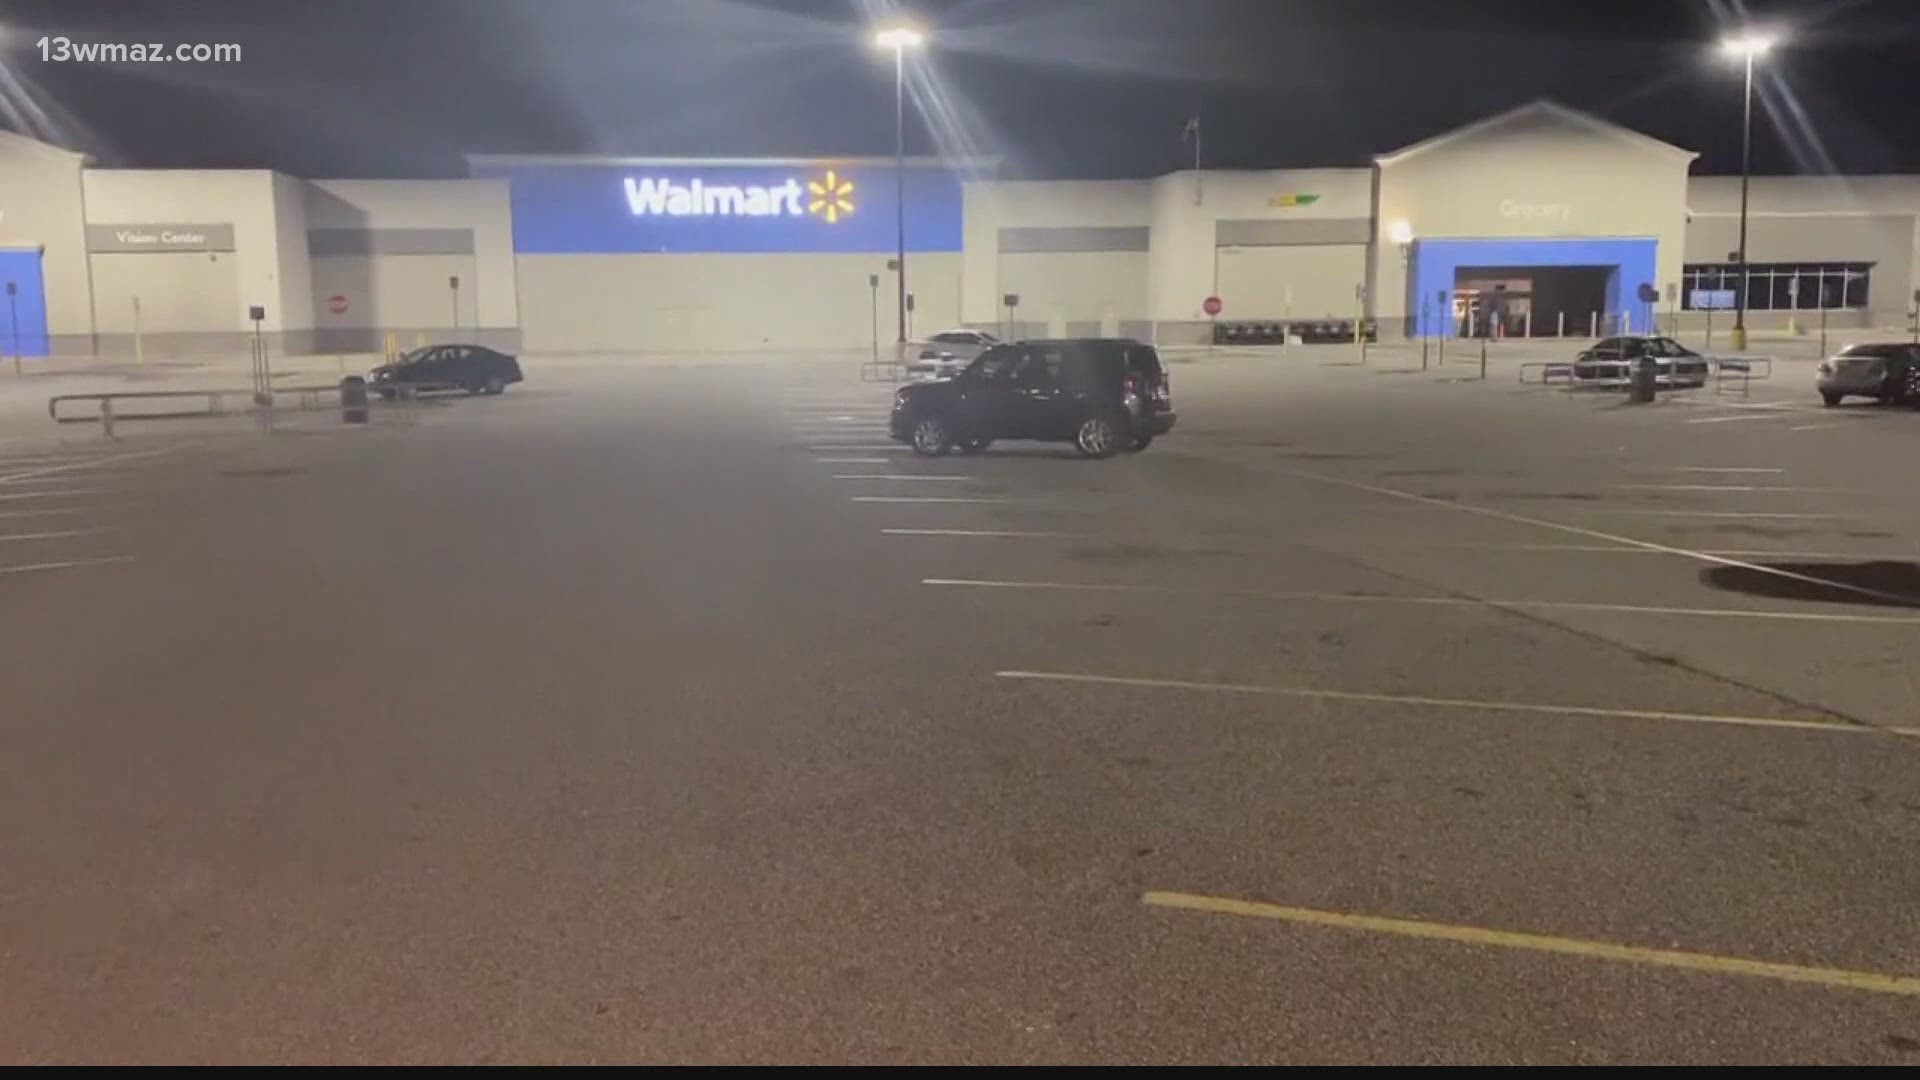 The Walmart parking lot shooting is the second homicide in Warner Robins this week, and Police Chief John Wagner says that's unusual.